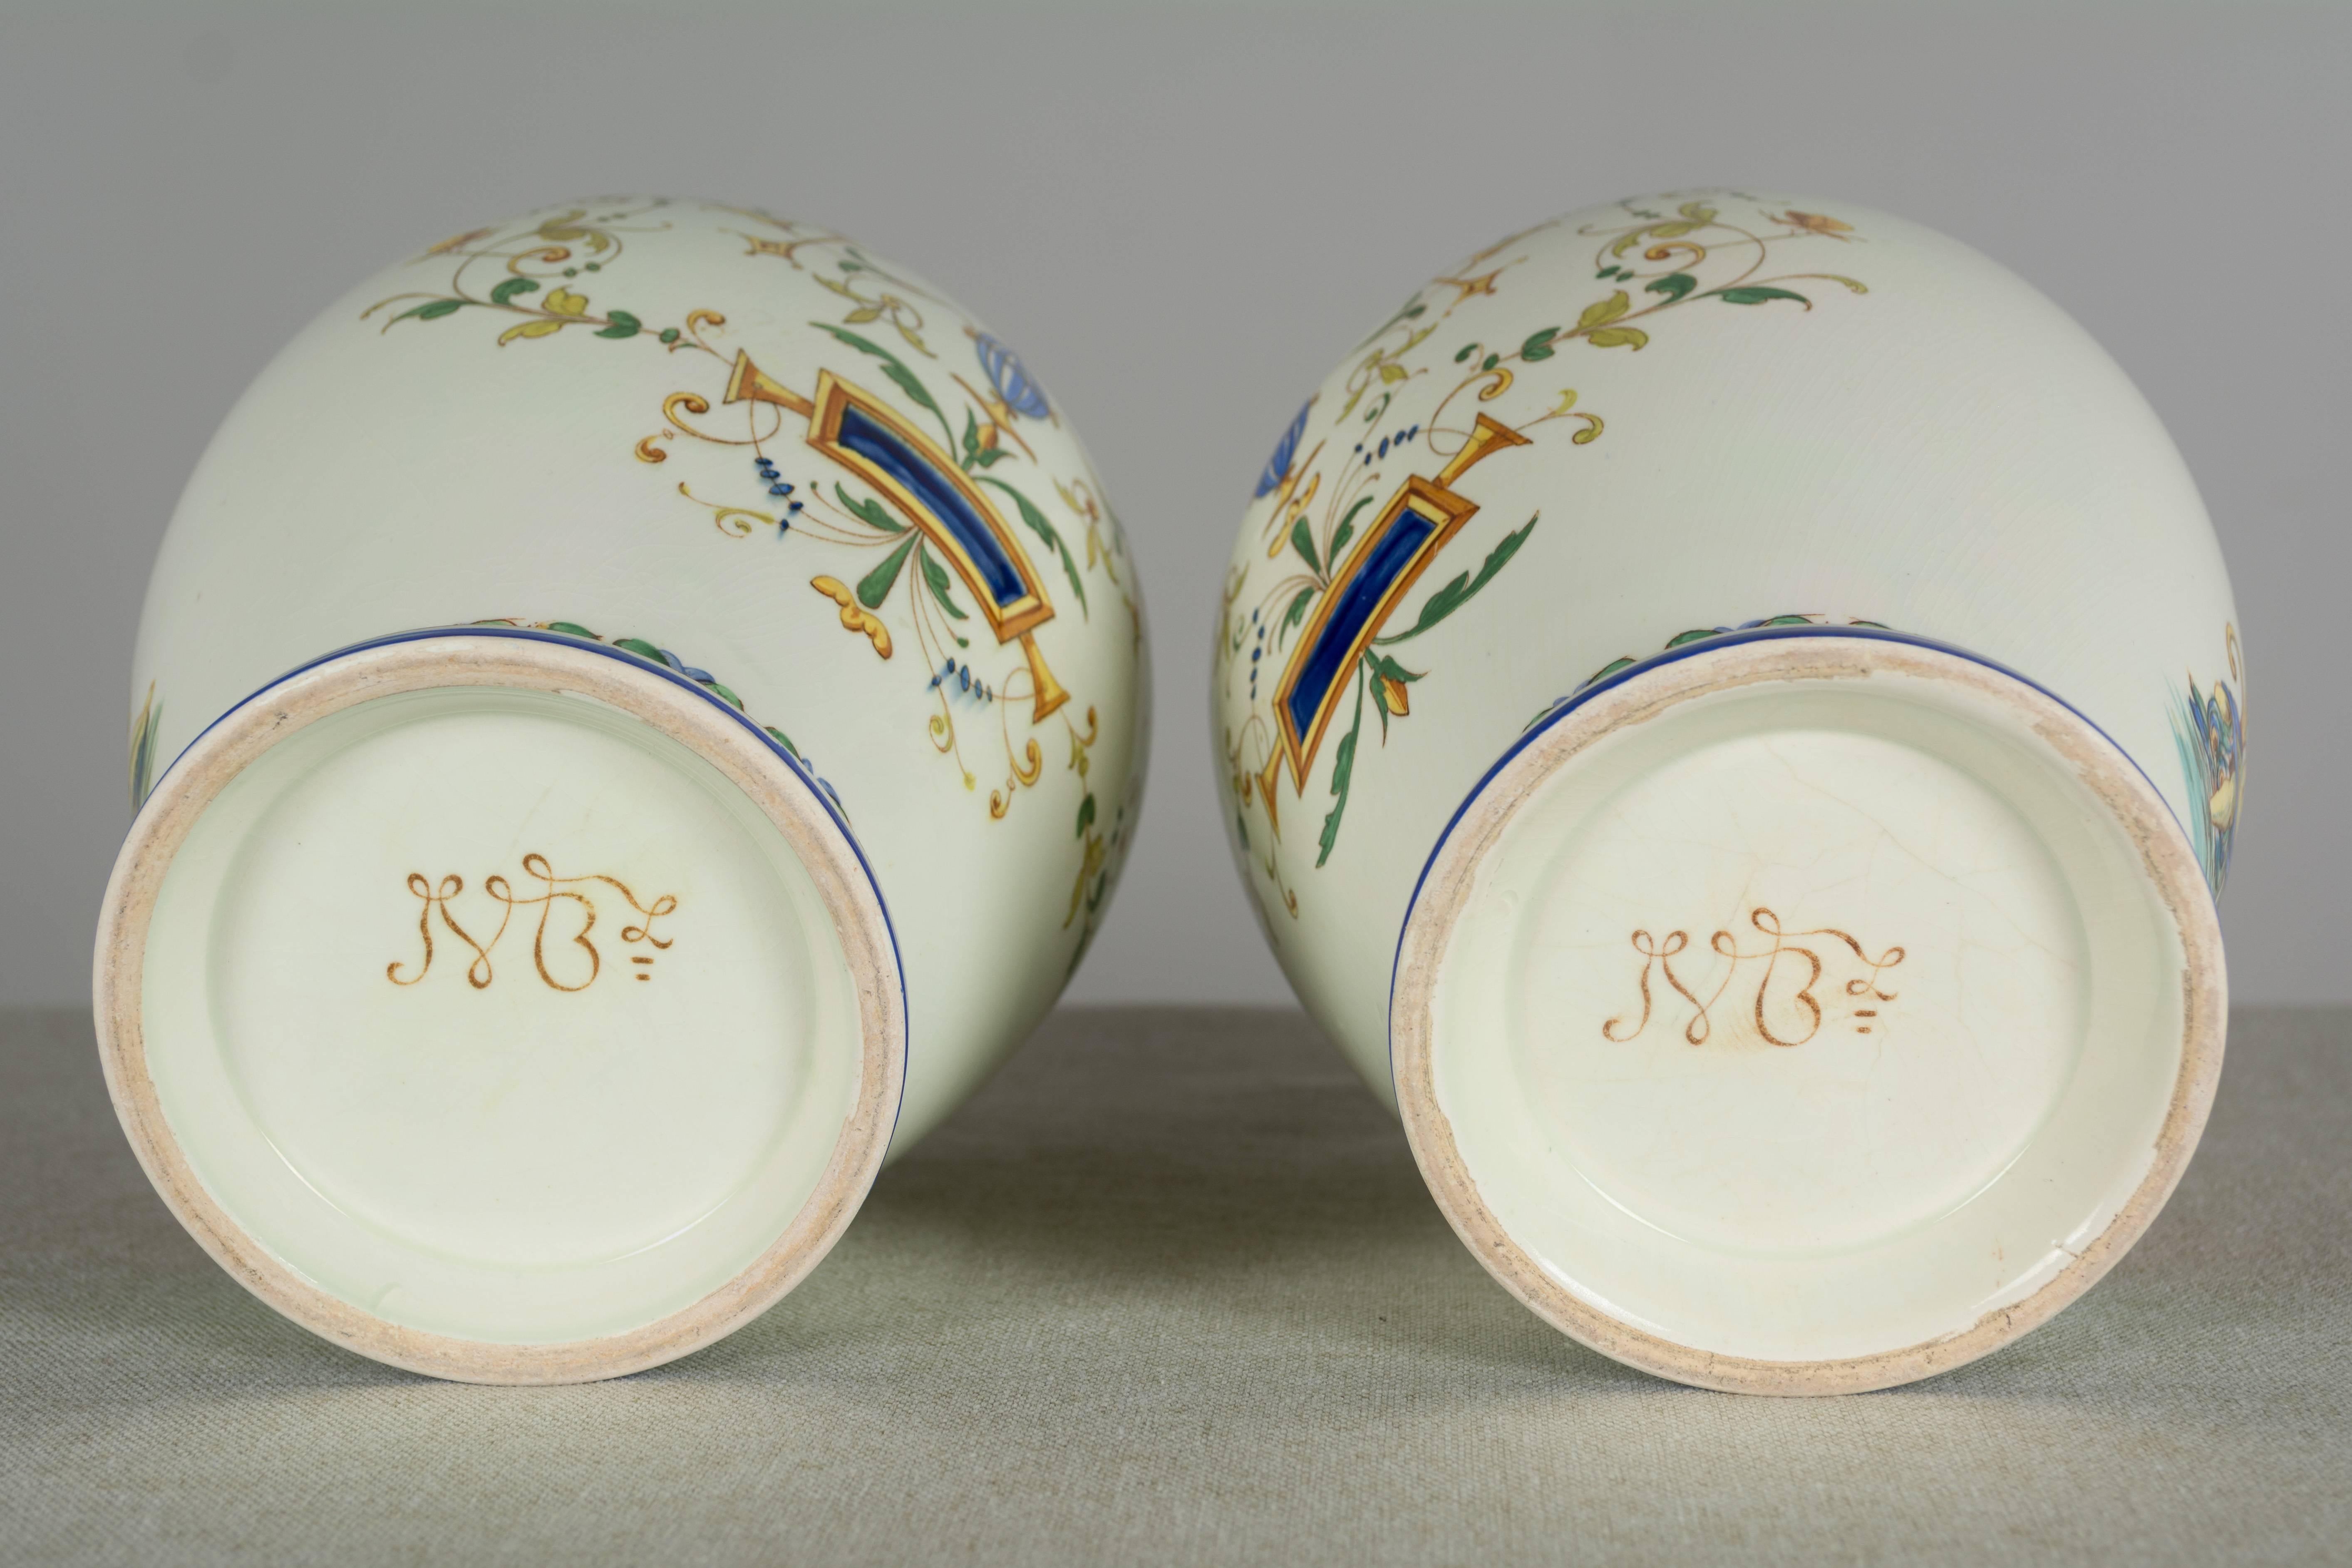 Pair of French Faience Vases by Jules Vieillard In Good Condition For Sale In Winter Park, FL